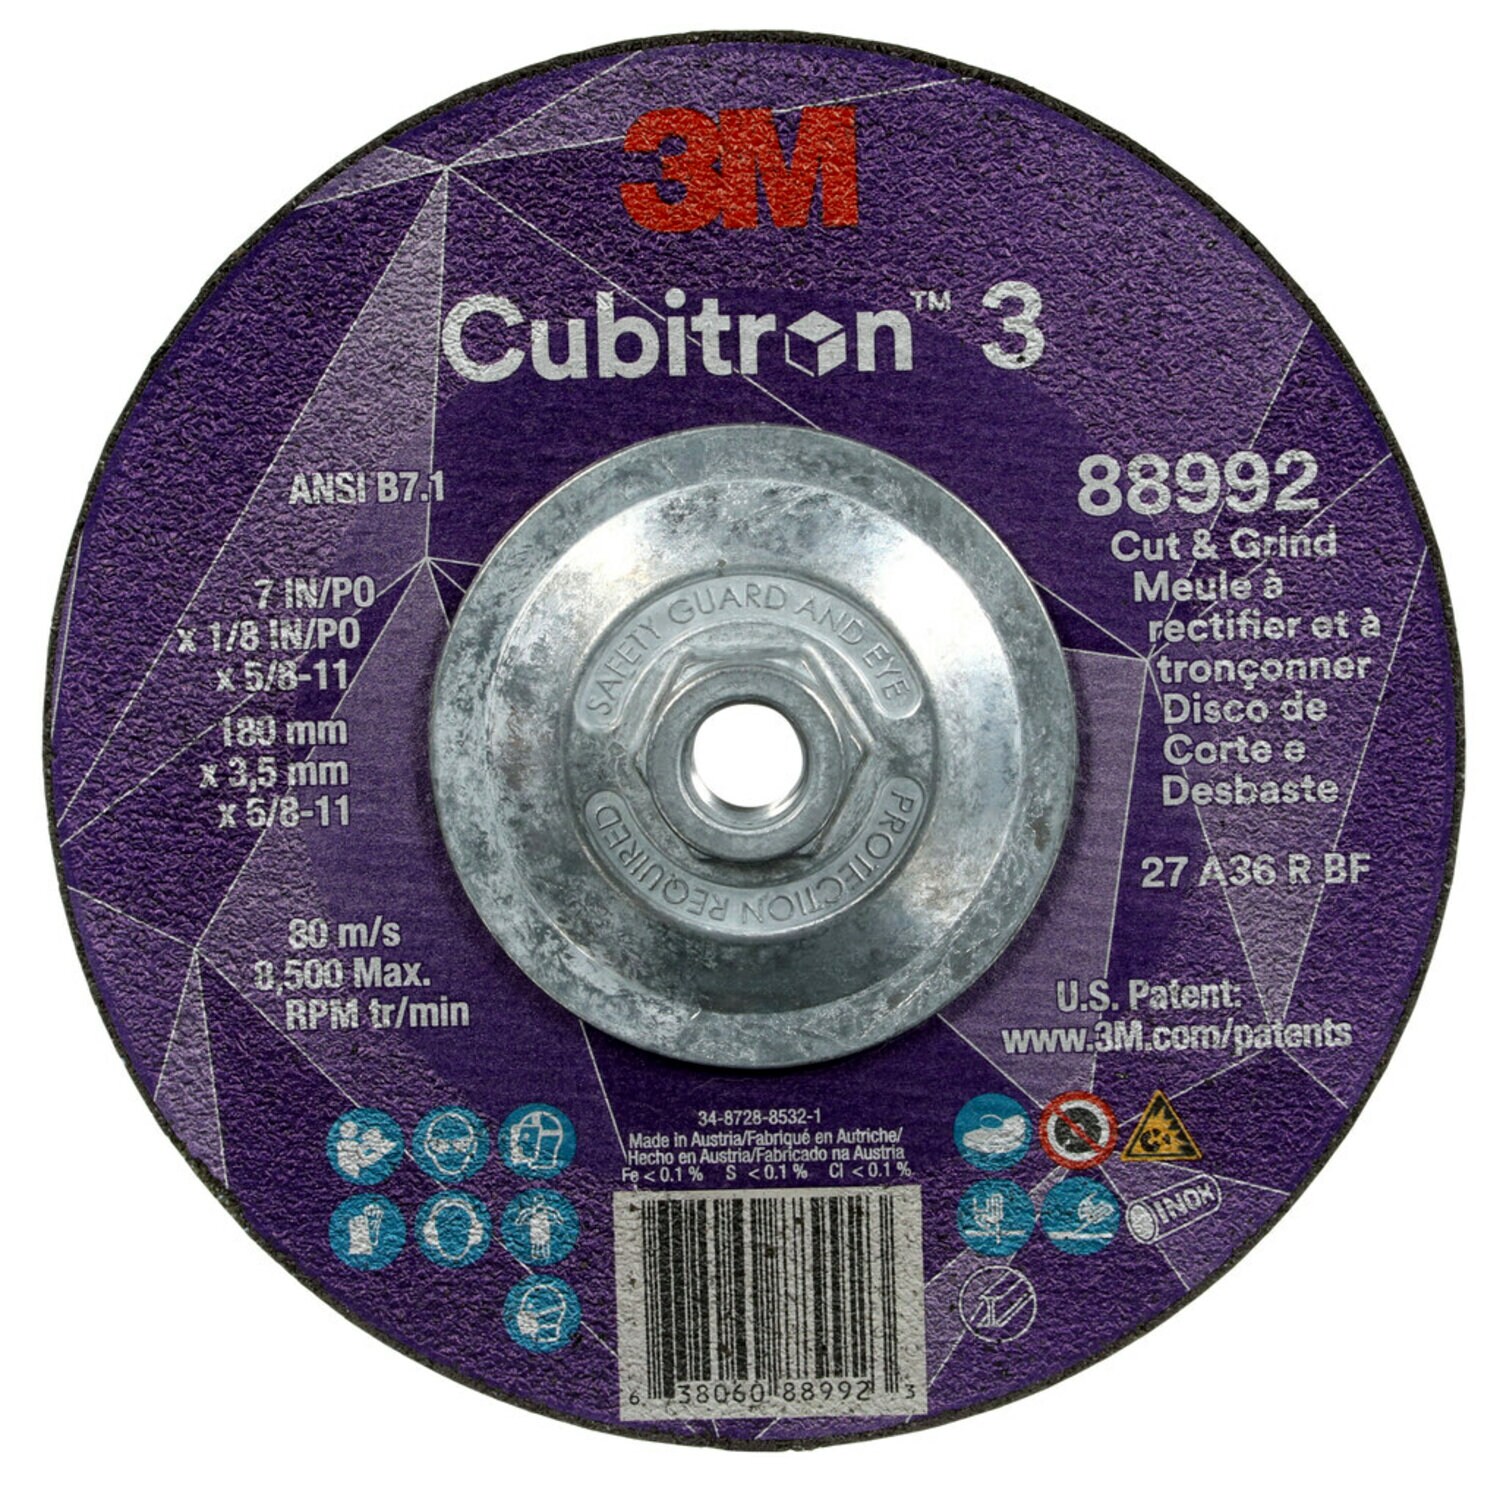 7100313195 - 3M Cubitron 3 Cut and Grind Wheel, 88992, 36+, T27, 7 in x 1/8 in x
5/8 in-11 (180 x 3.2 mm x 5/8-11 in), ANSI, 10 ea/Case